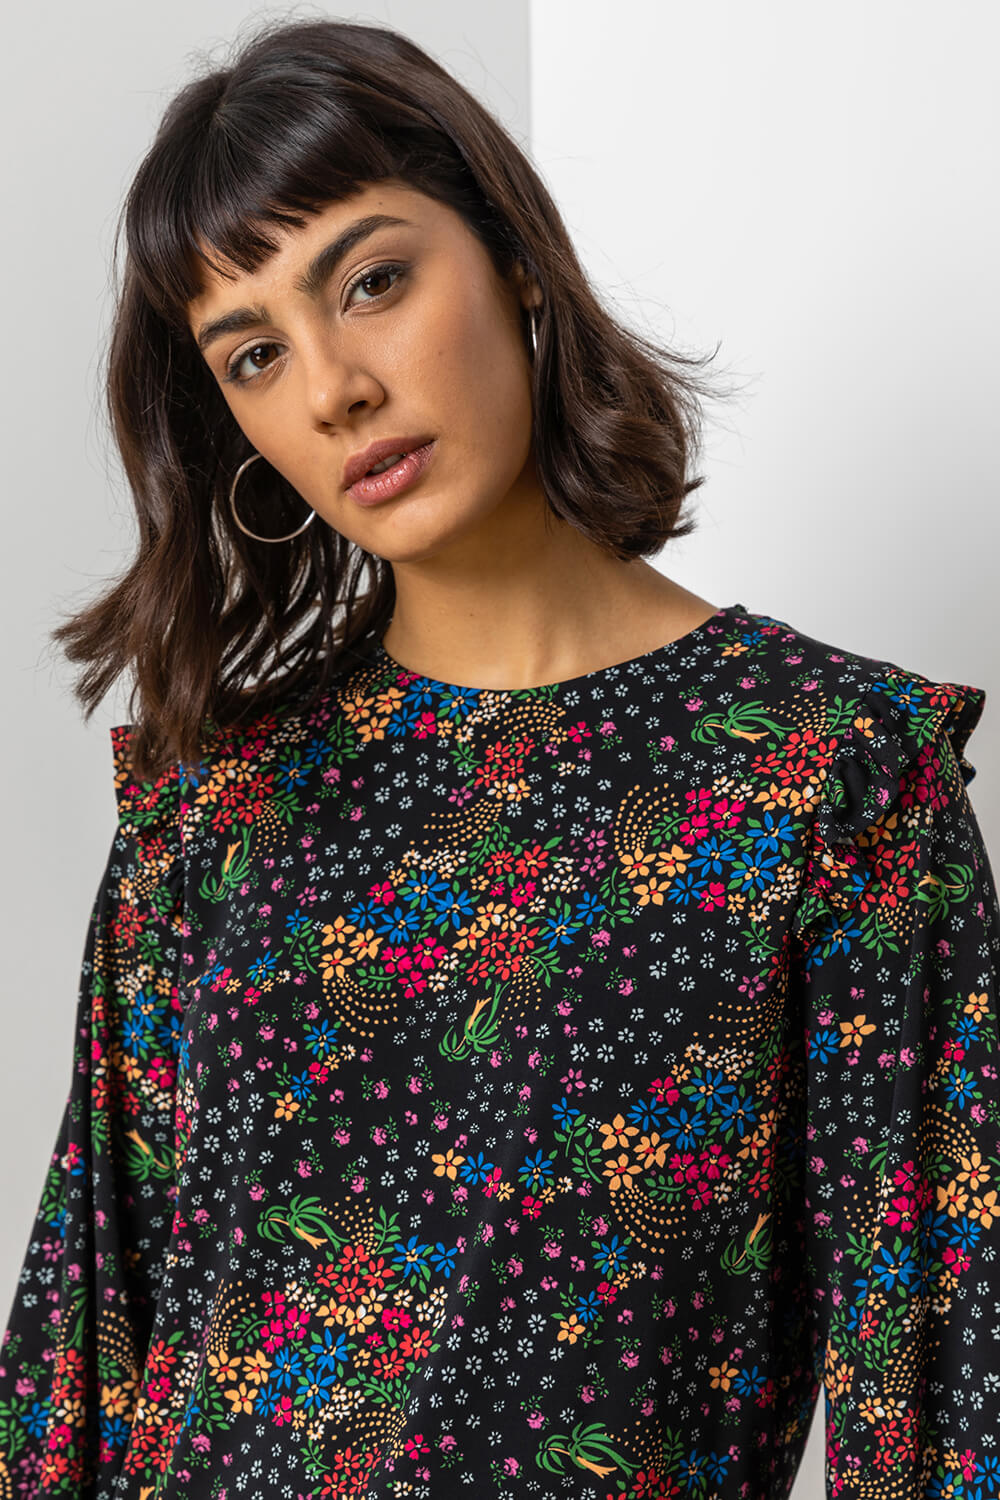 Black Floral Print Frill Detail Top, Image 4 of 4